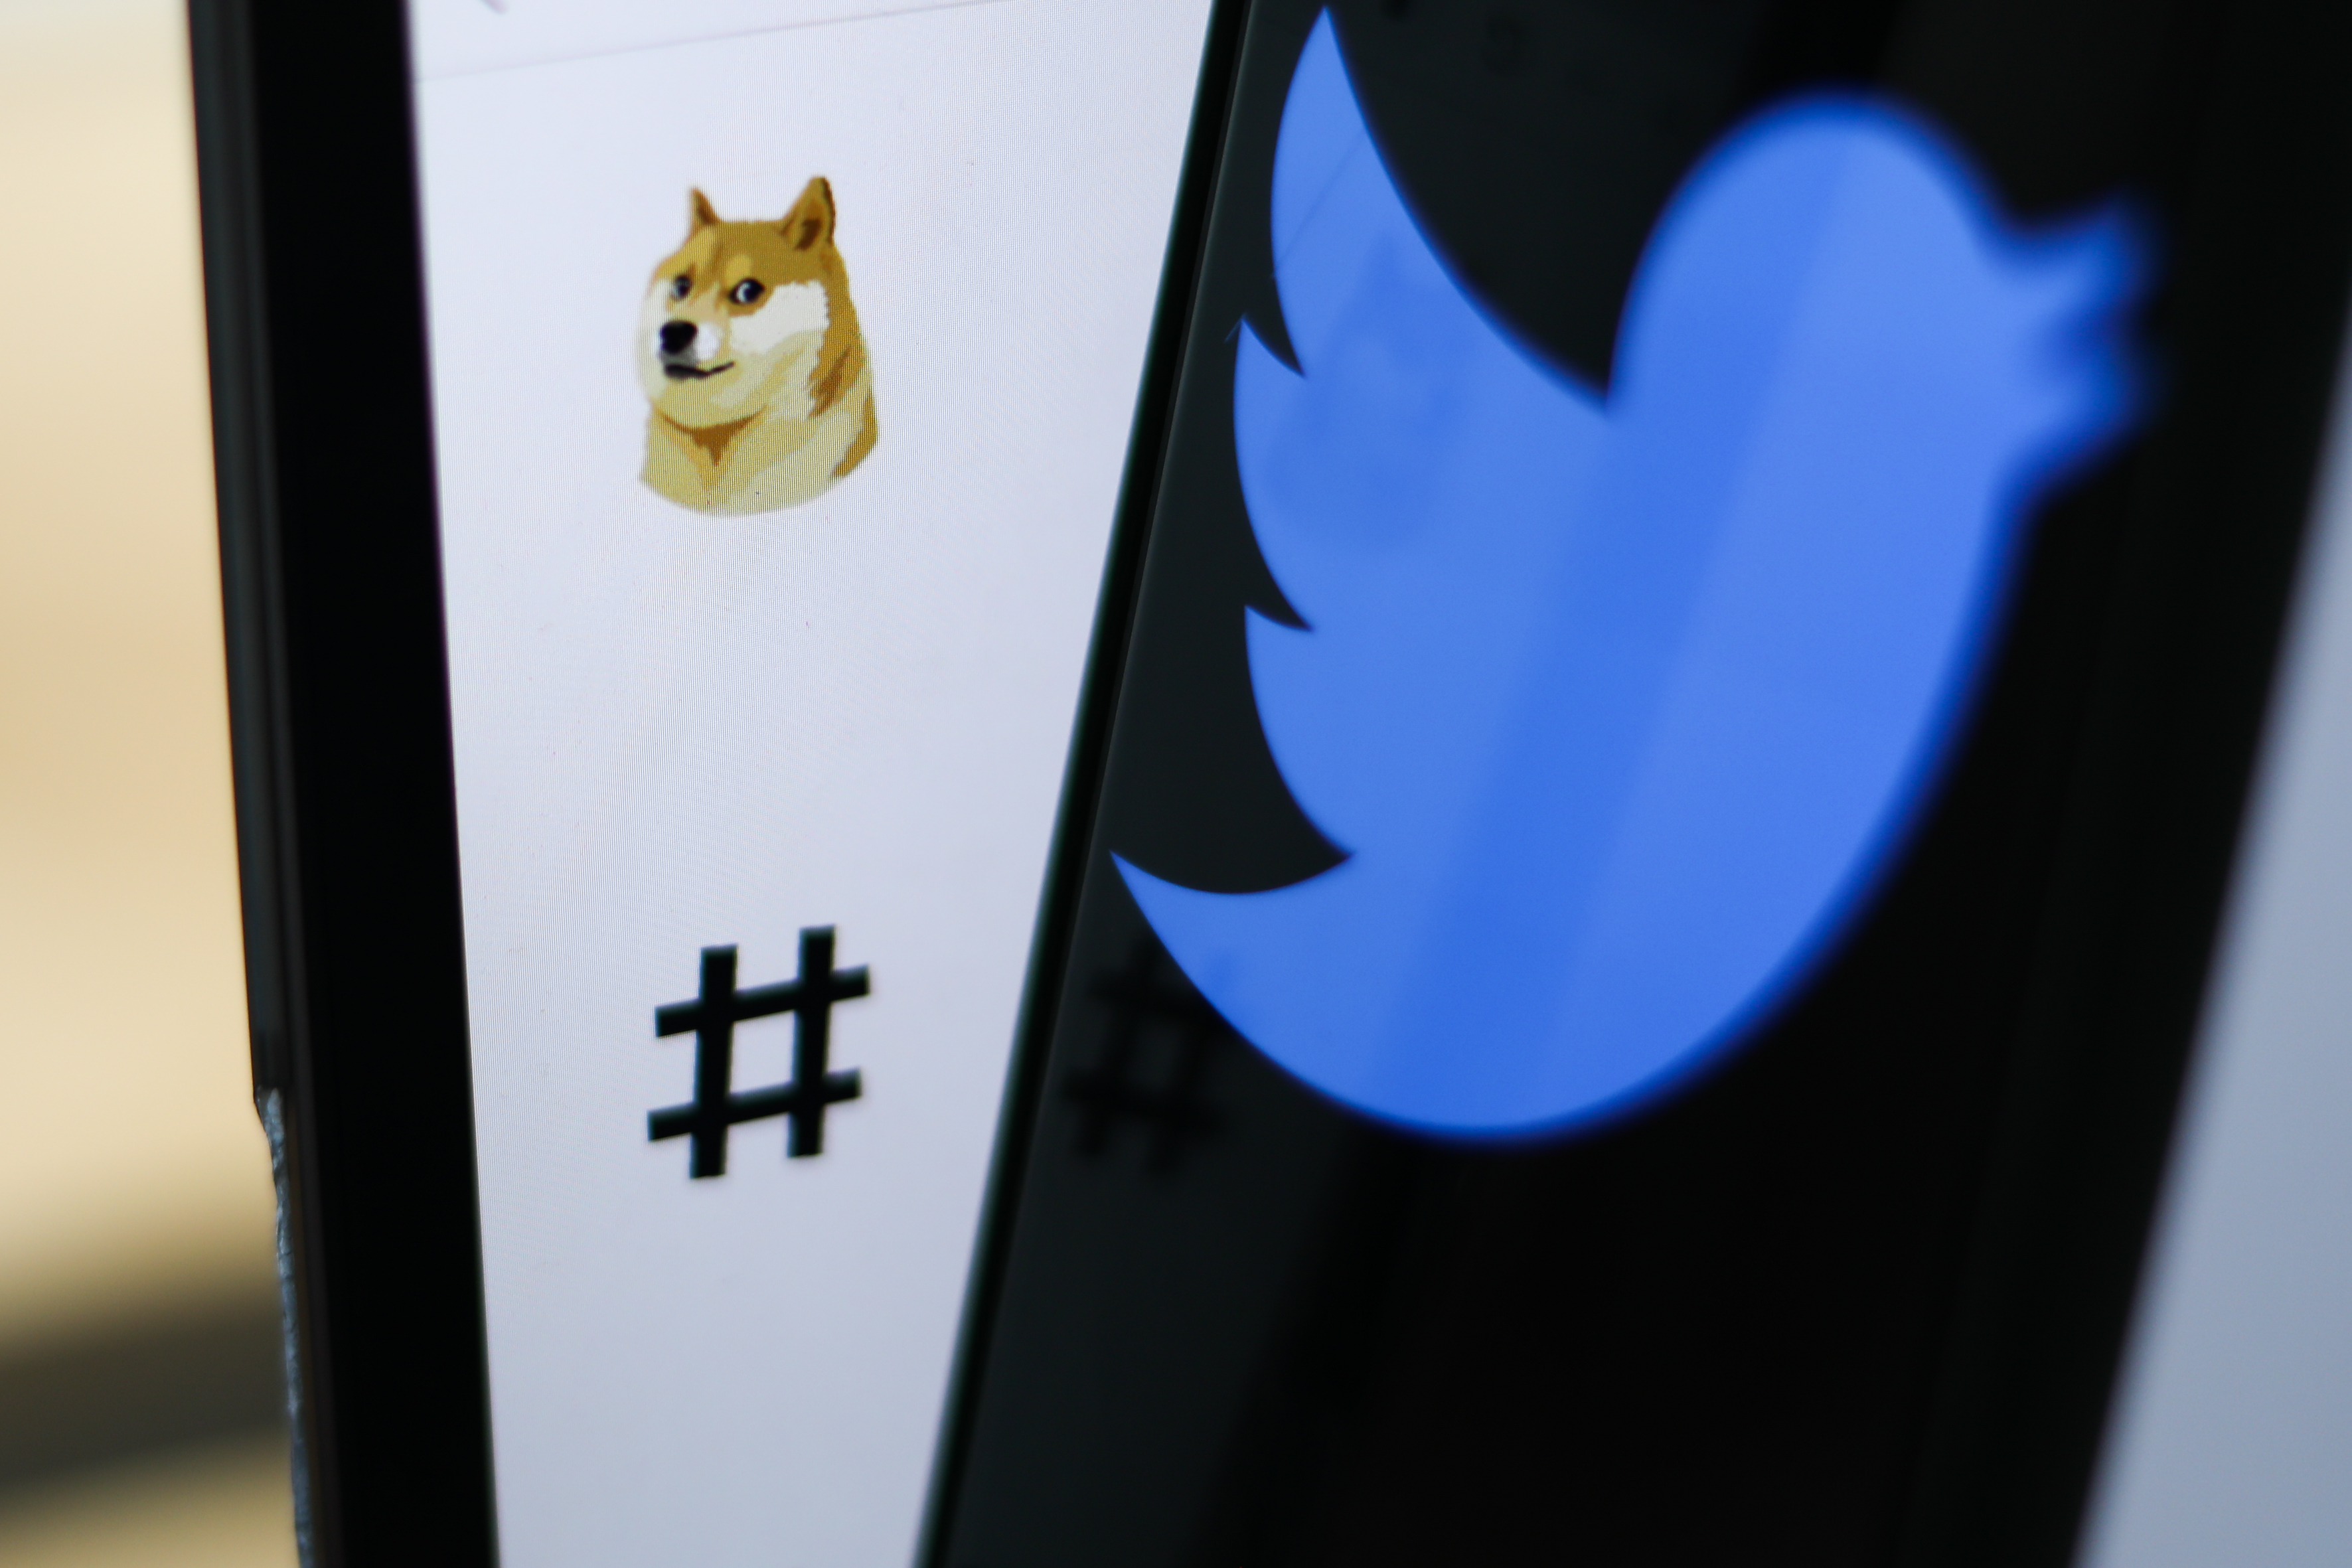 Twitter is force-feeding you paid accounts from people you don’t follow and now displaying the doge meme instead of its bird logo